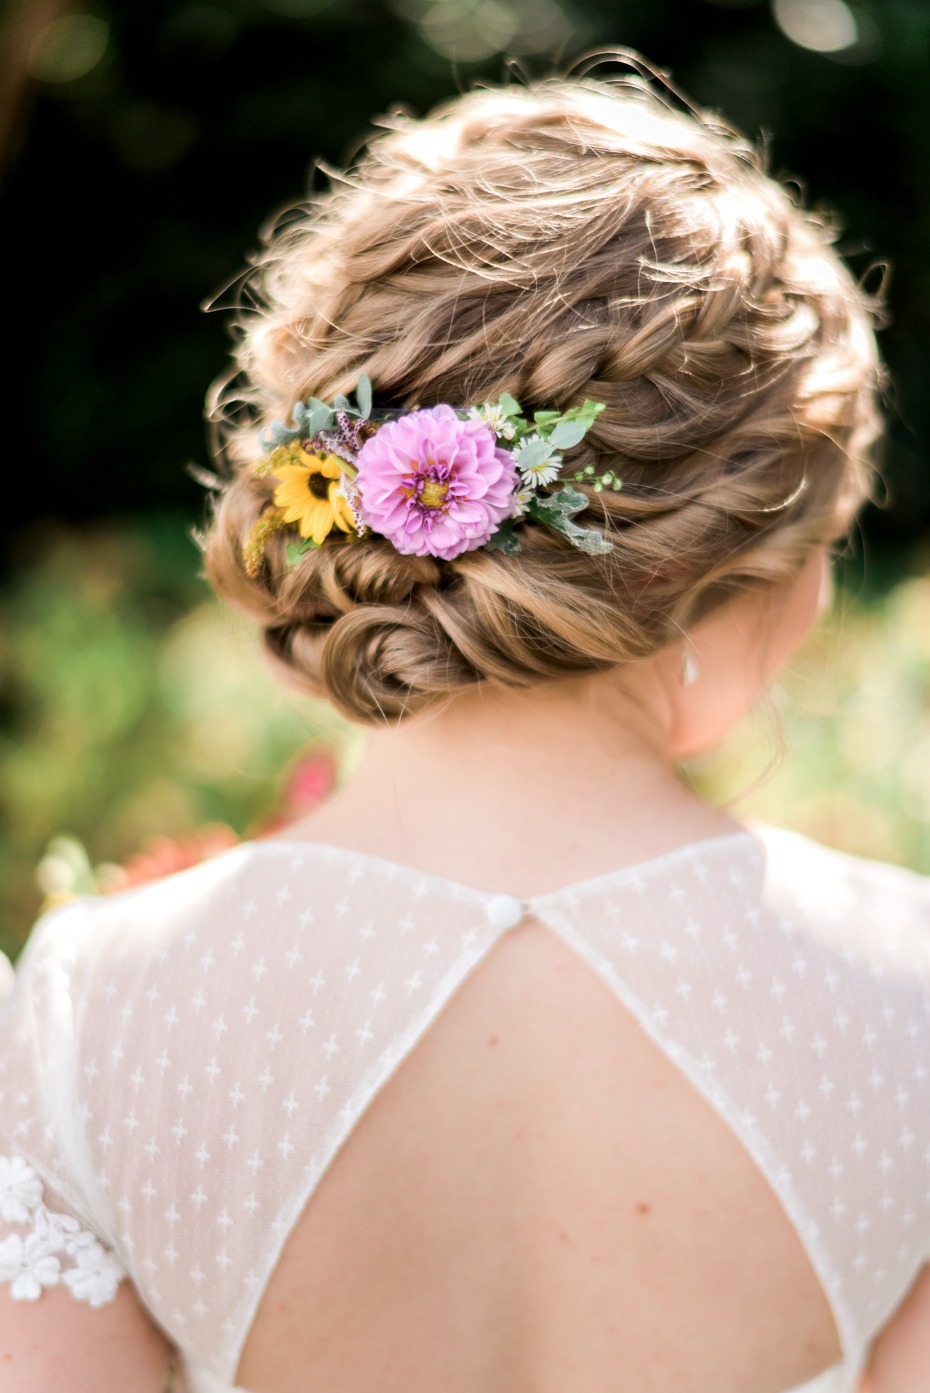 braided wedding hair updo accented by flowers